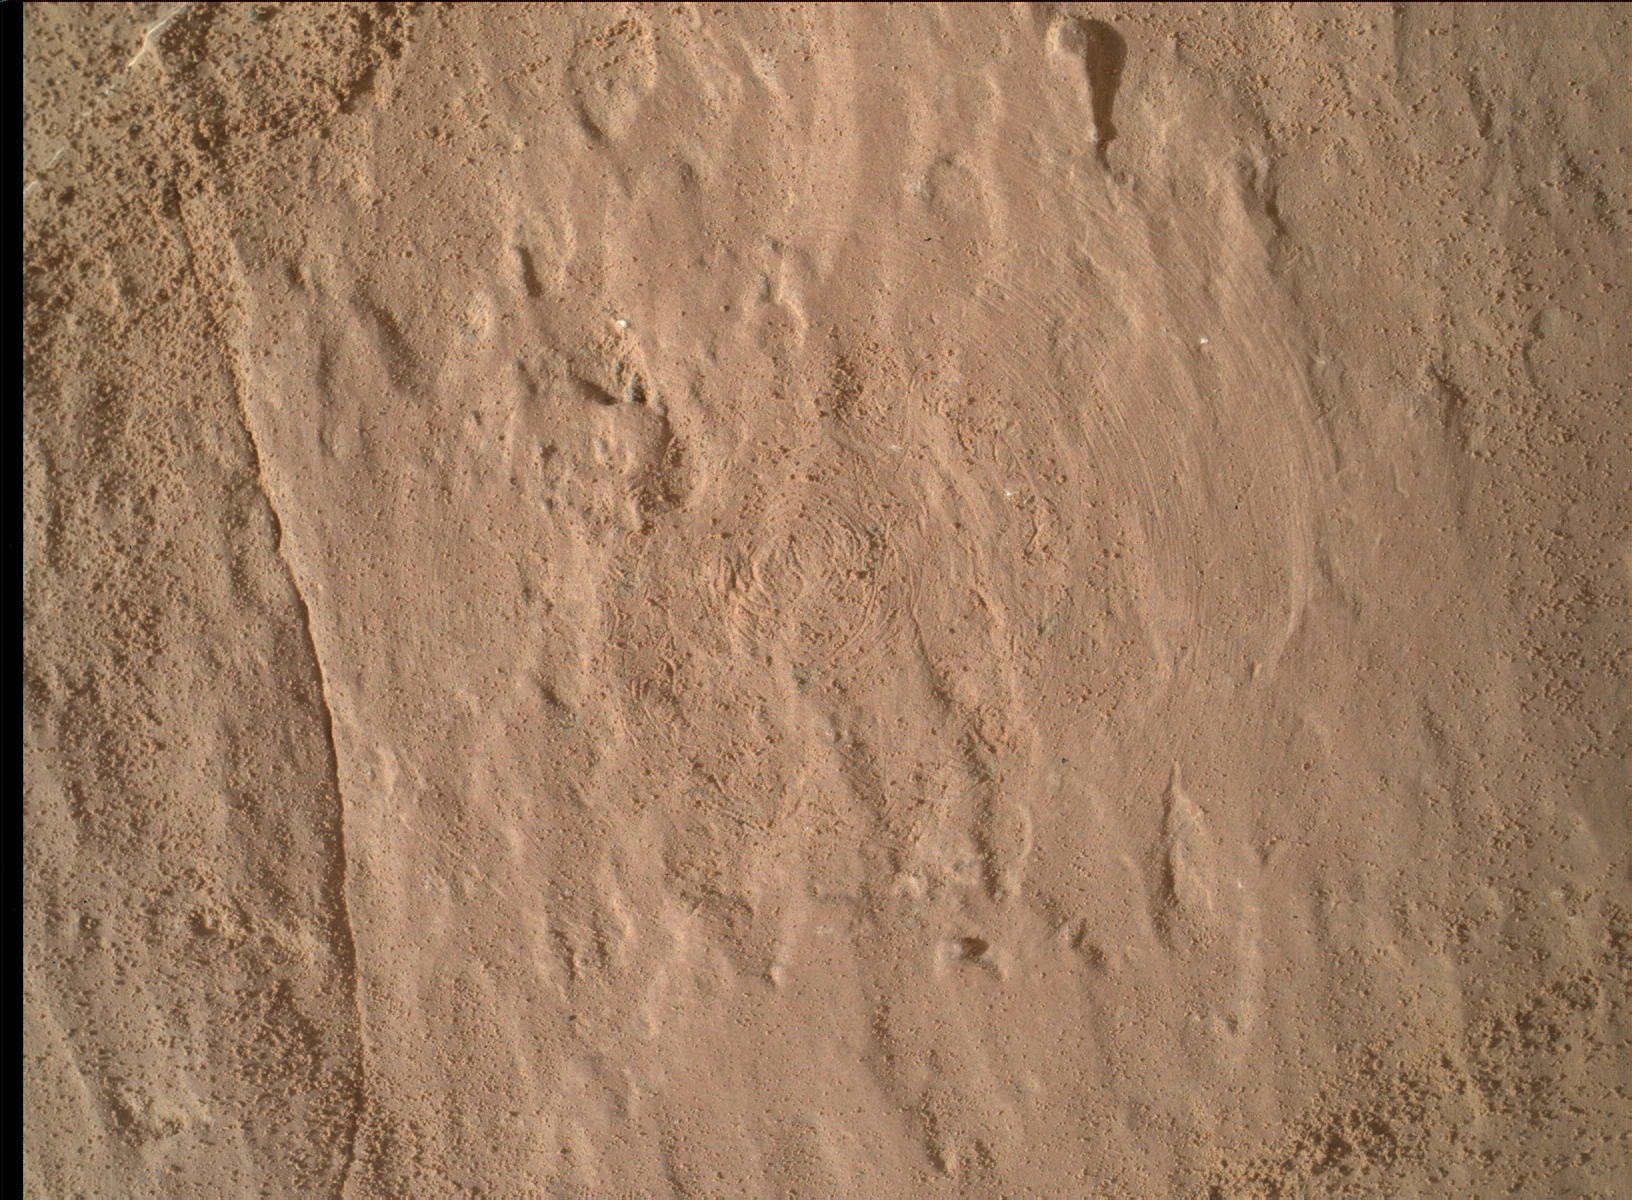 Nasa's Mars rover Curiosity acquired this image using its Mars Hand Lens Imager (MAHLI) on Sol 1531